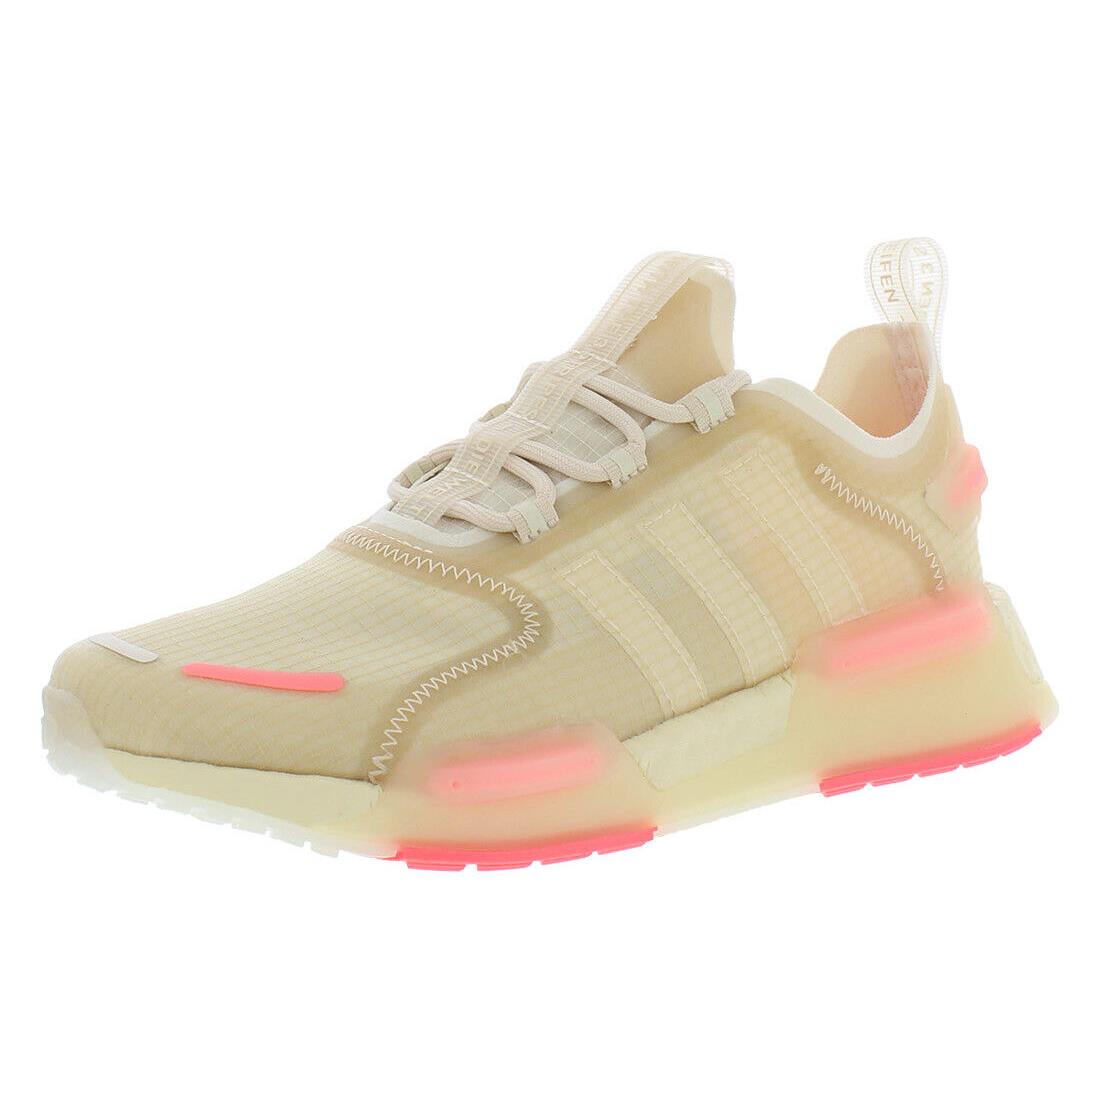 Adidas NMD_V3 Womens Shoes - Beige/Pink, Main: Beige